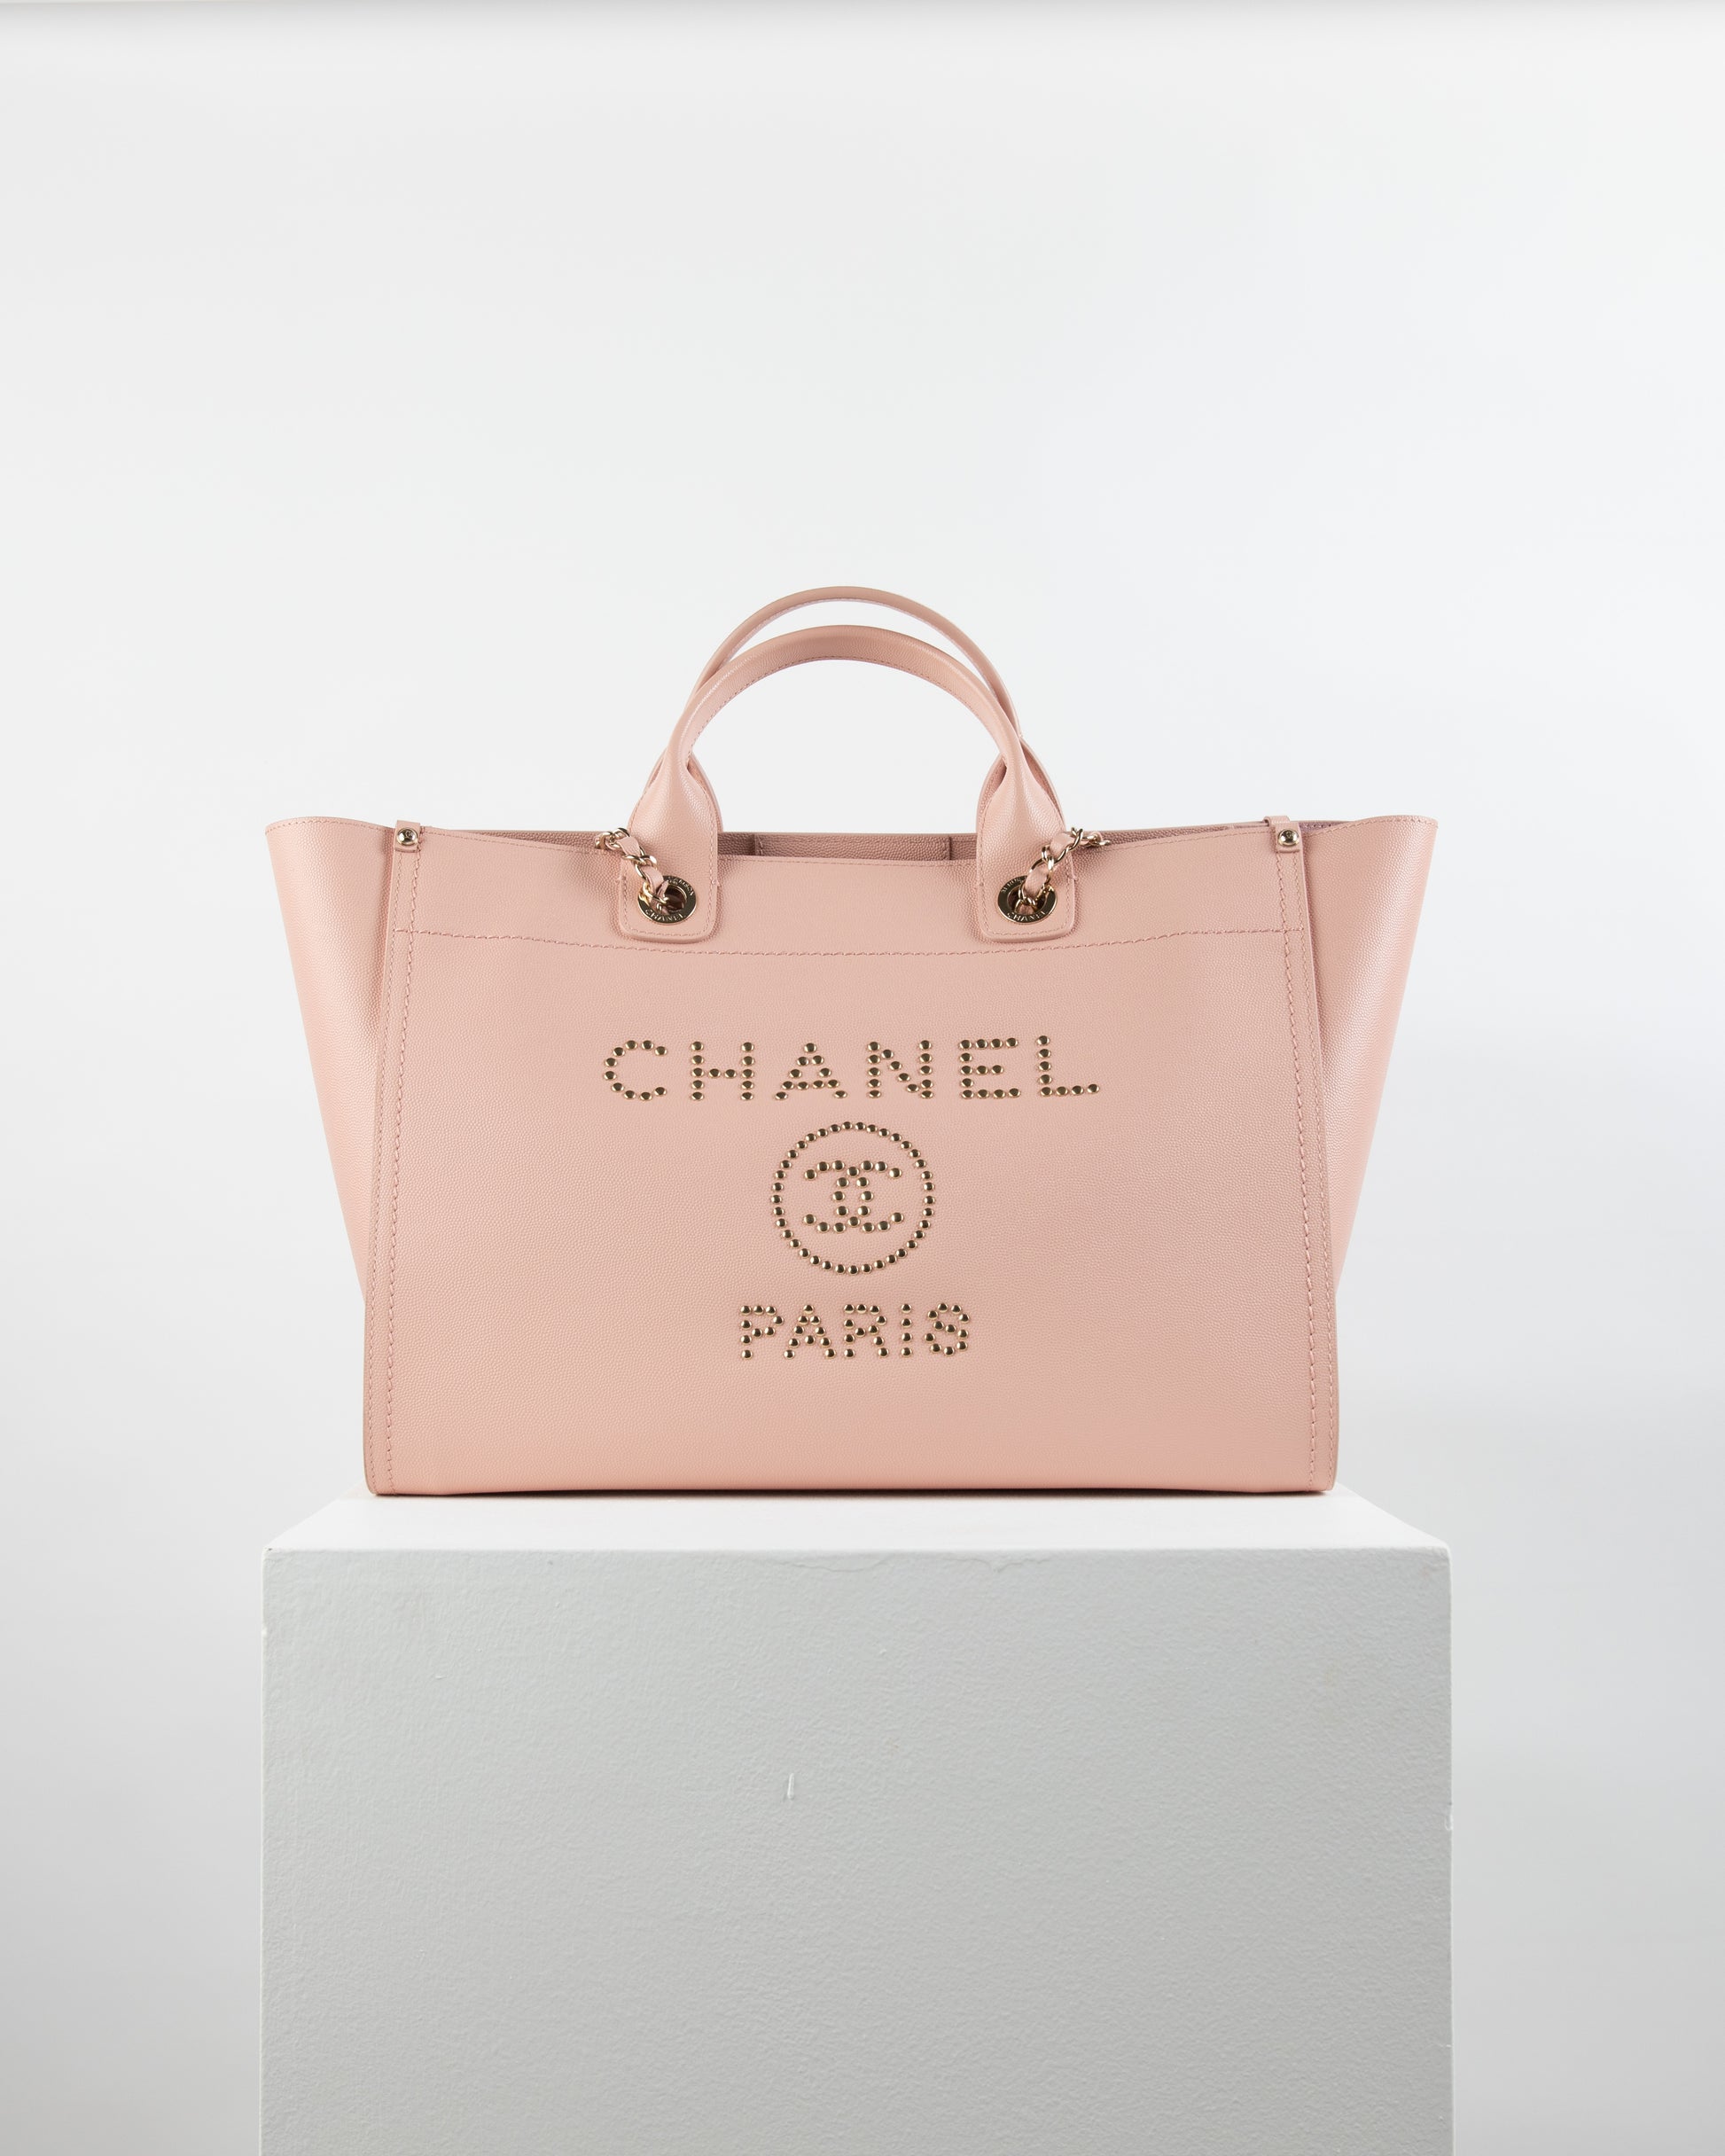 Chanel Deauville Large Pink Tote Bag